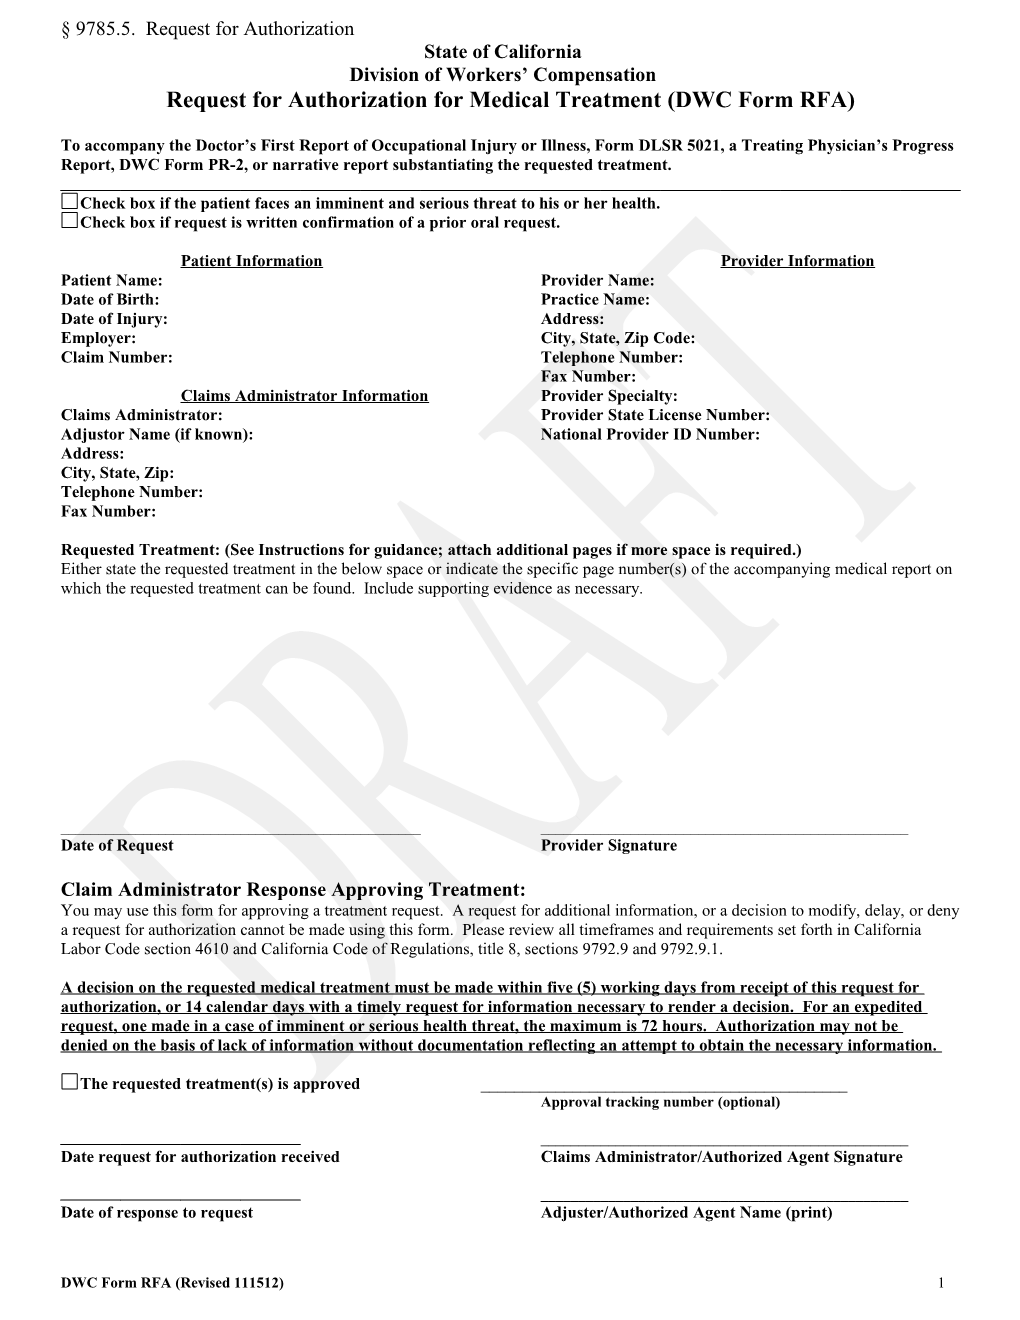 Request for Authorization for Medical Treatment (DWC Form RFA) s2